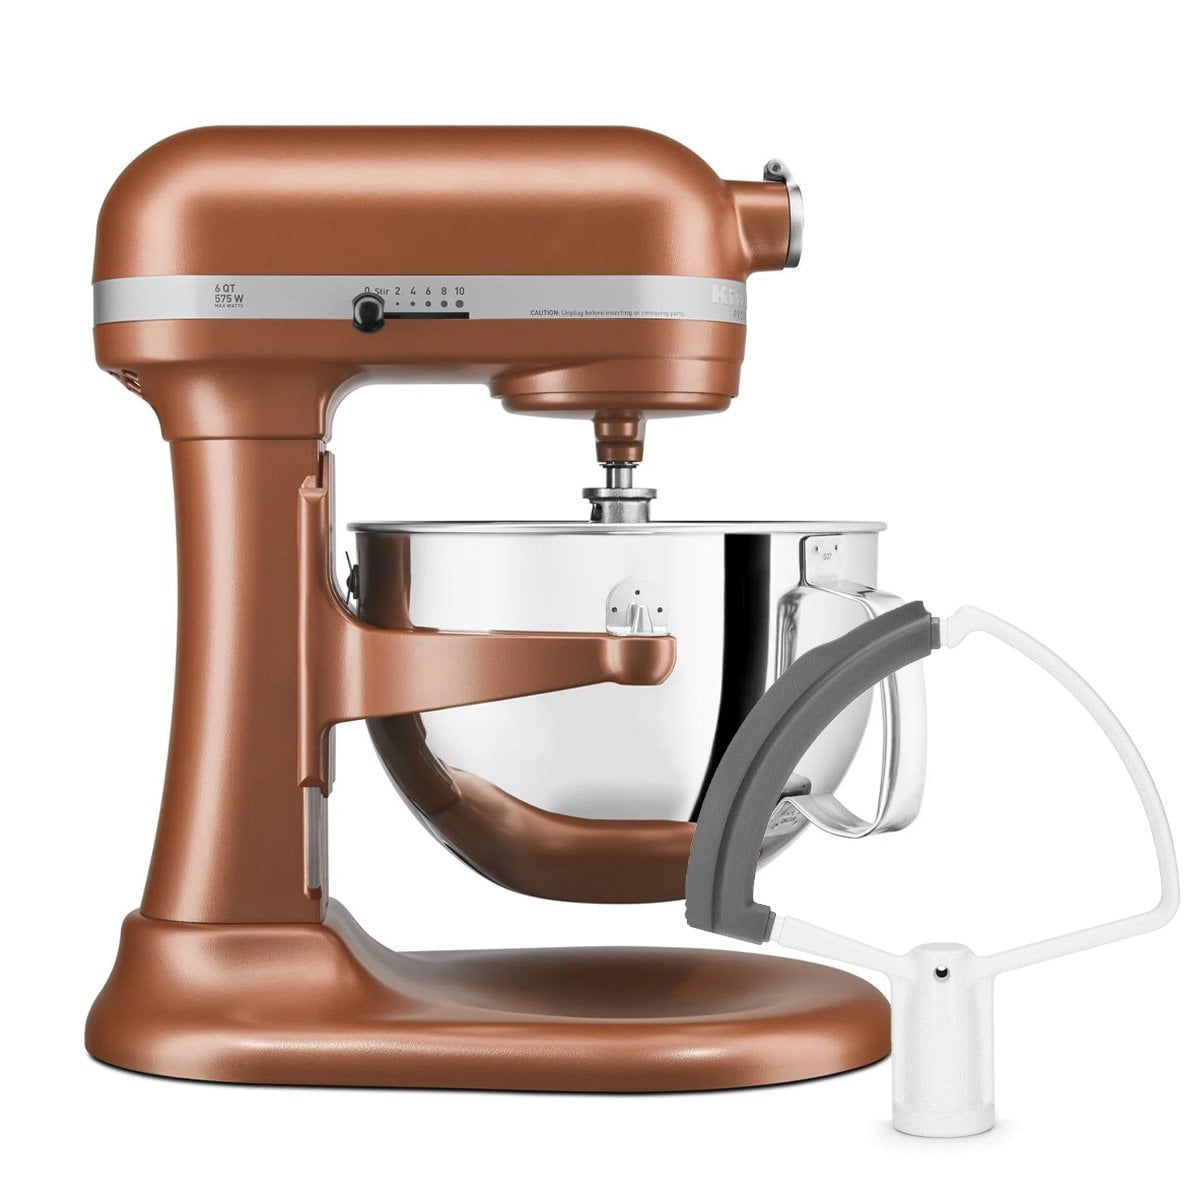 Season and Stir™ Copper Mixing Bowl for KitchenAid Lift Stand Mixers